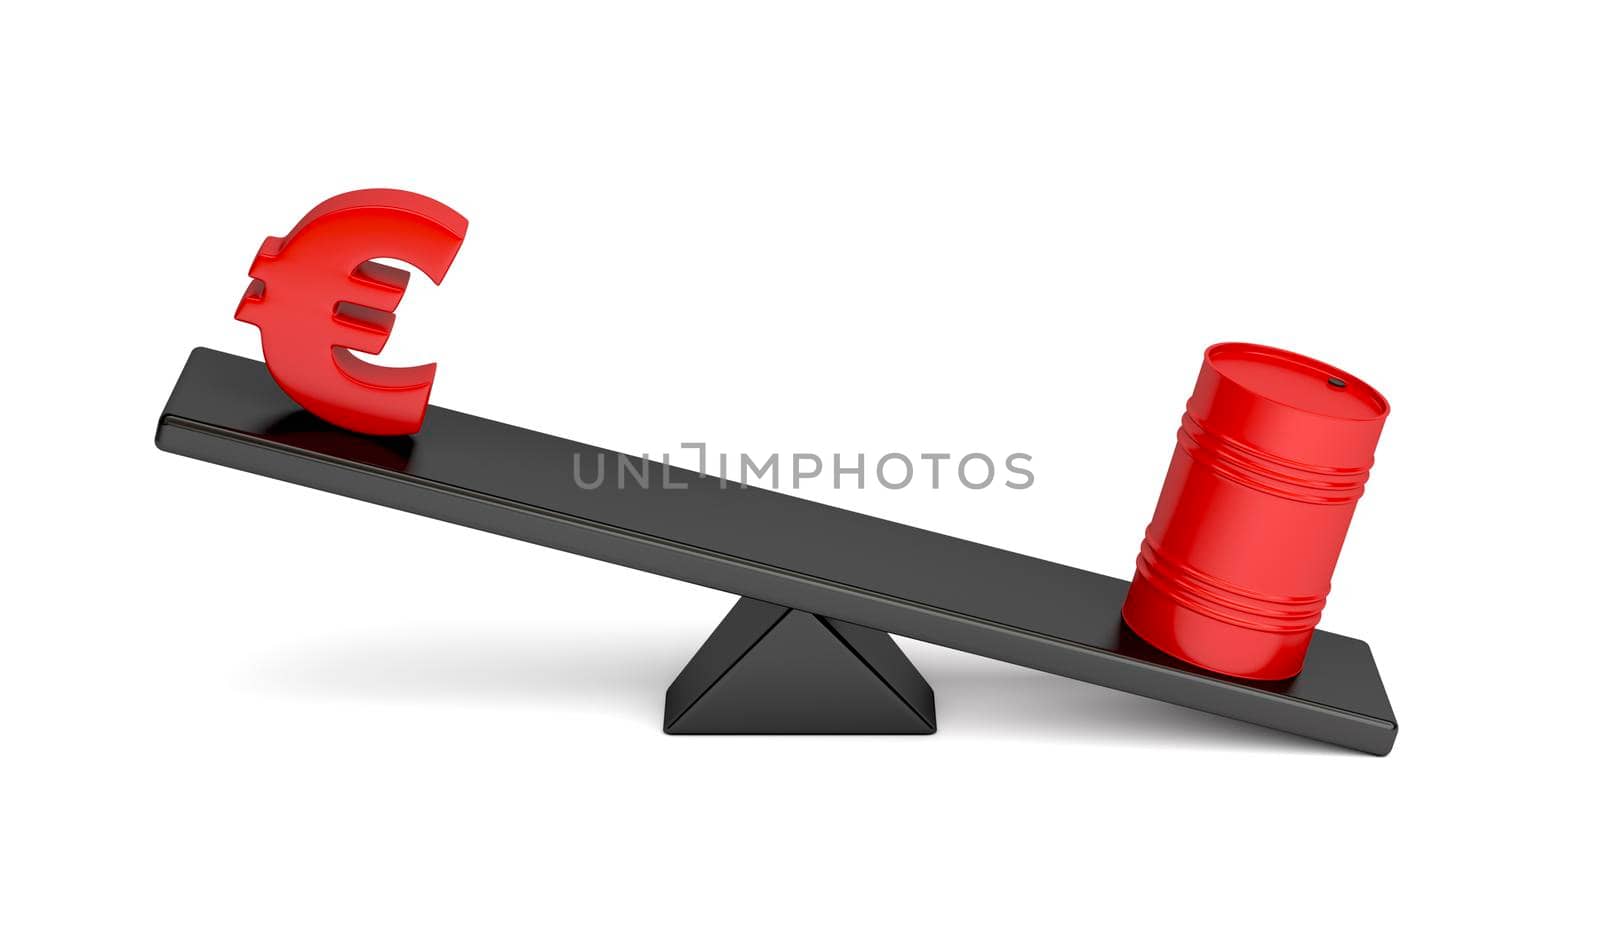 Concept image with euro sign and oil barrel on a seesaw